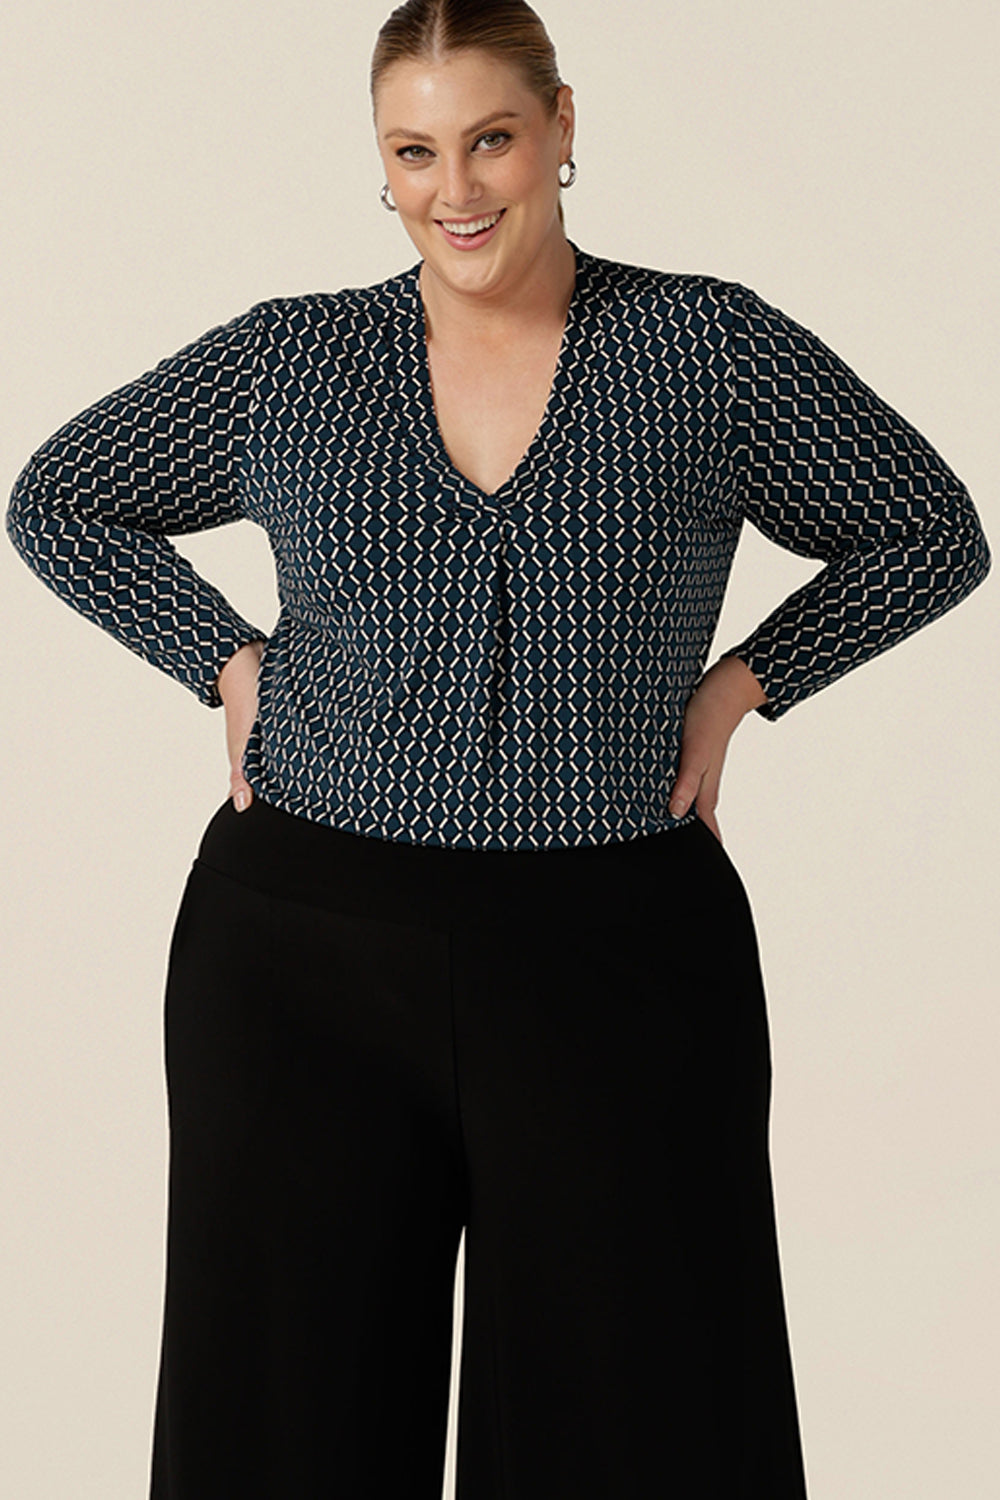 A good work wear top for plus size women, the long sleeved Dakota Top is a V neck top in blue and white Infinity print jersey. Worn with wide leg, navy work pants, both are made in Australia by Australian and New Zealand women's clothes brand, L&F, shop this smart top in sizes 8 to 24.